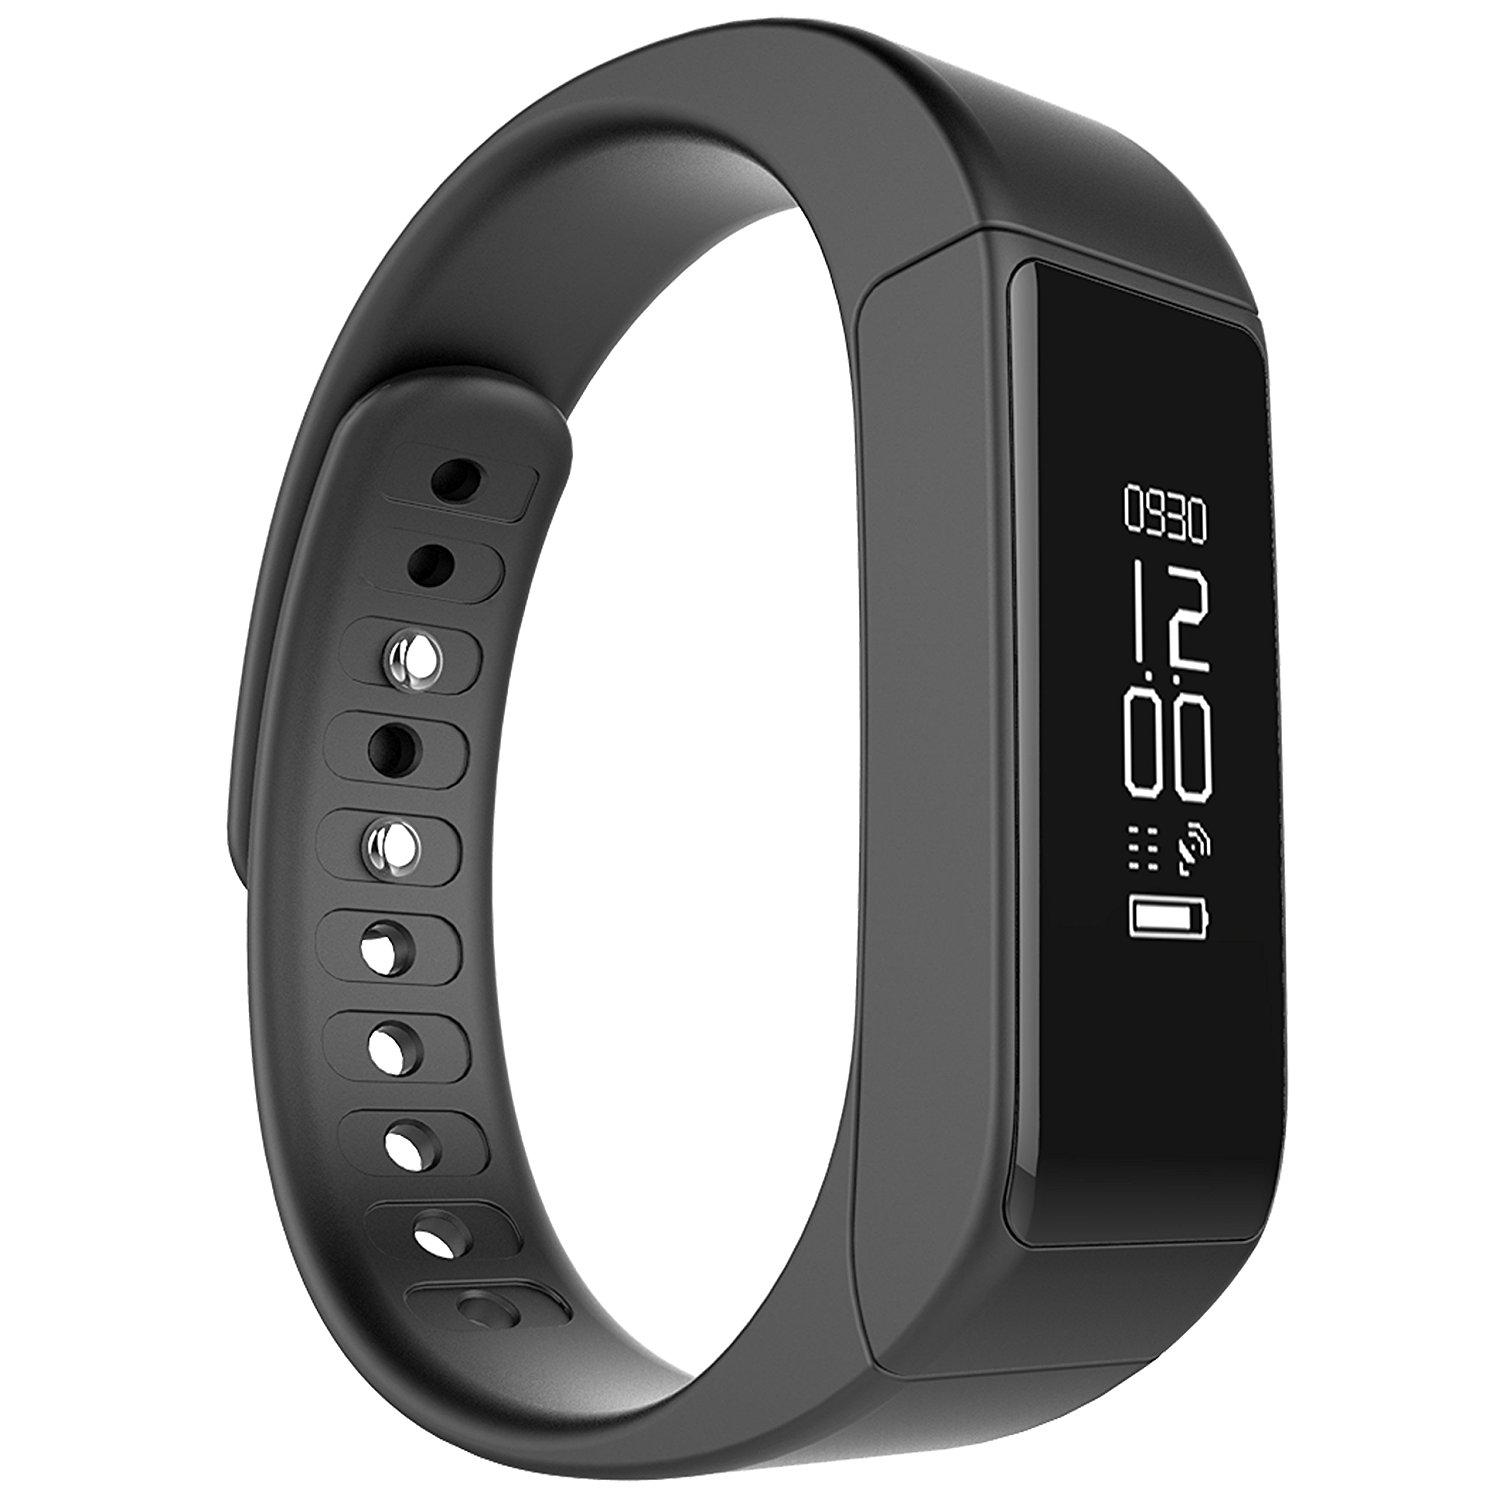 Bluetooth 4.0 Smartband I5 Plus IP67 Waterproof Touch Screen Sports Bracelet Fitness Pedometer Tracker with Sleep Monitoring Calorie Track